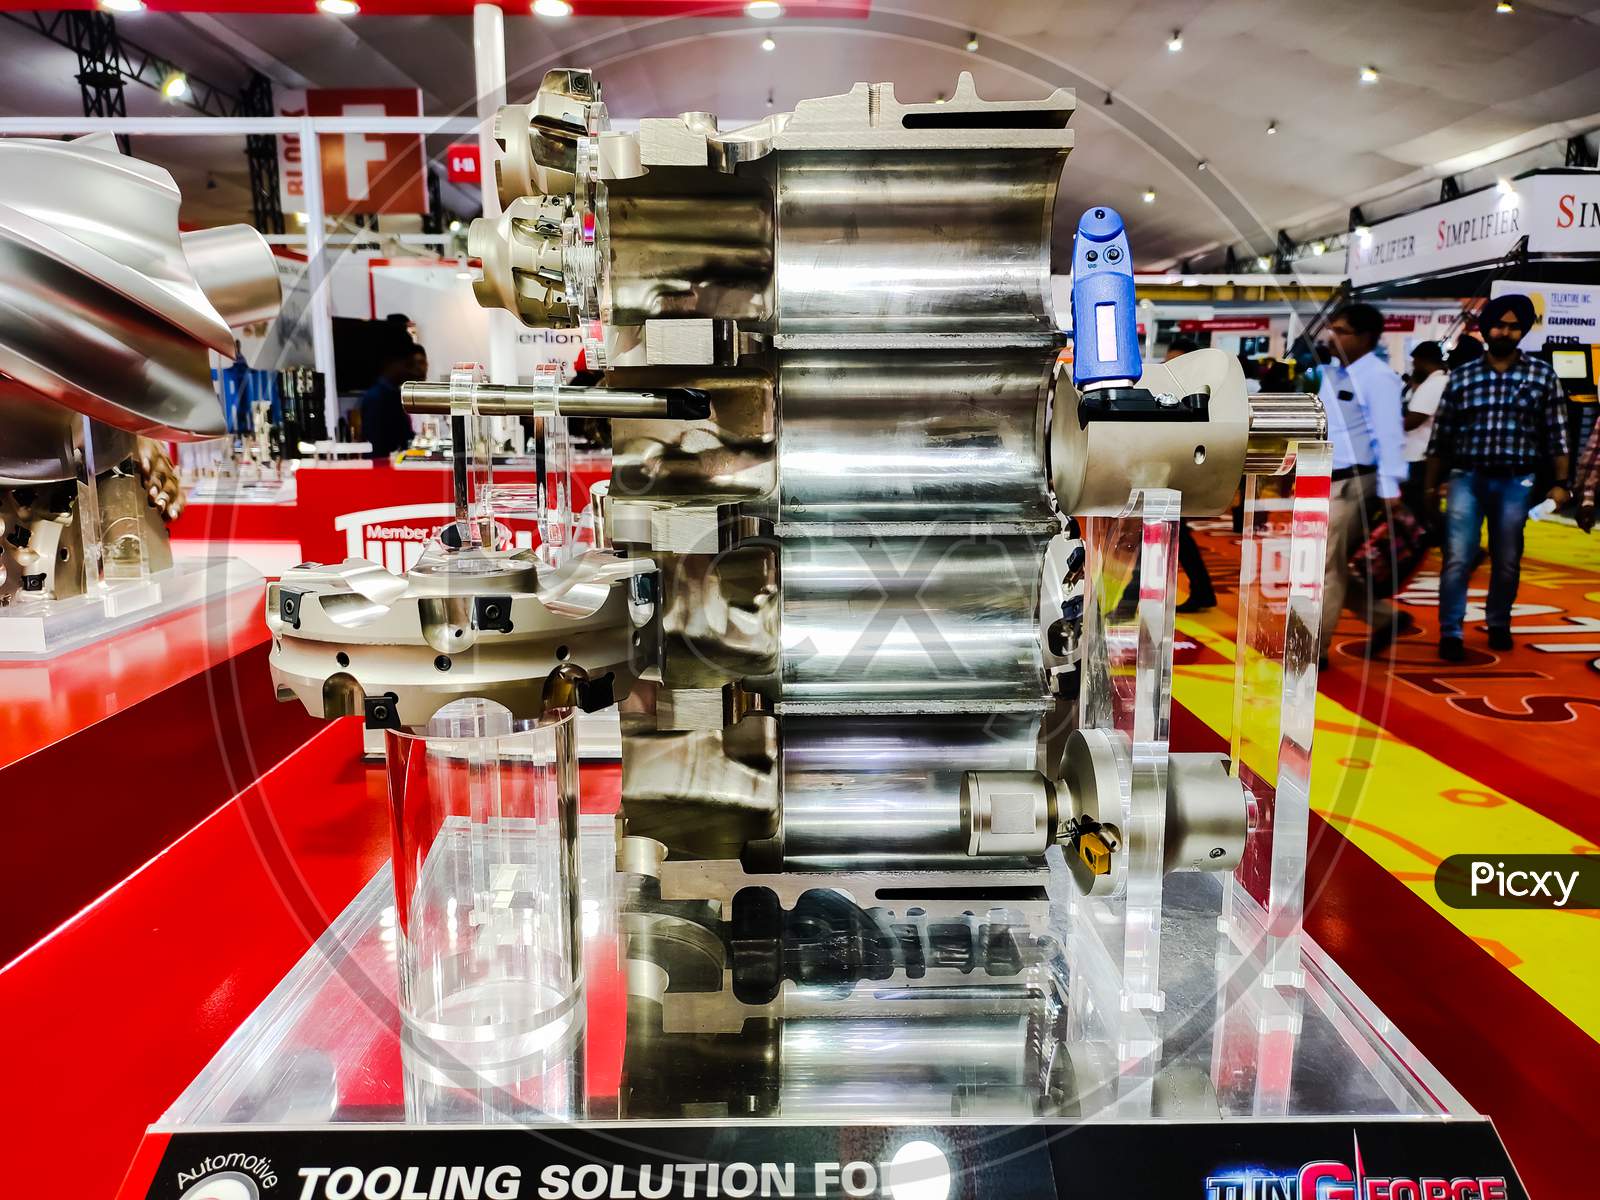 Cnc boring and cutting Machine tools in exhibition in Ludhiana Punjab India on 23-24 February 2020. Exhibition organize by Mach expo